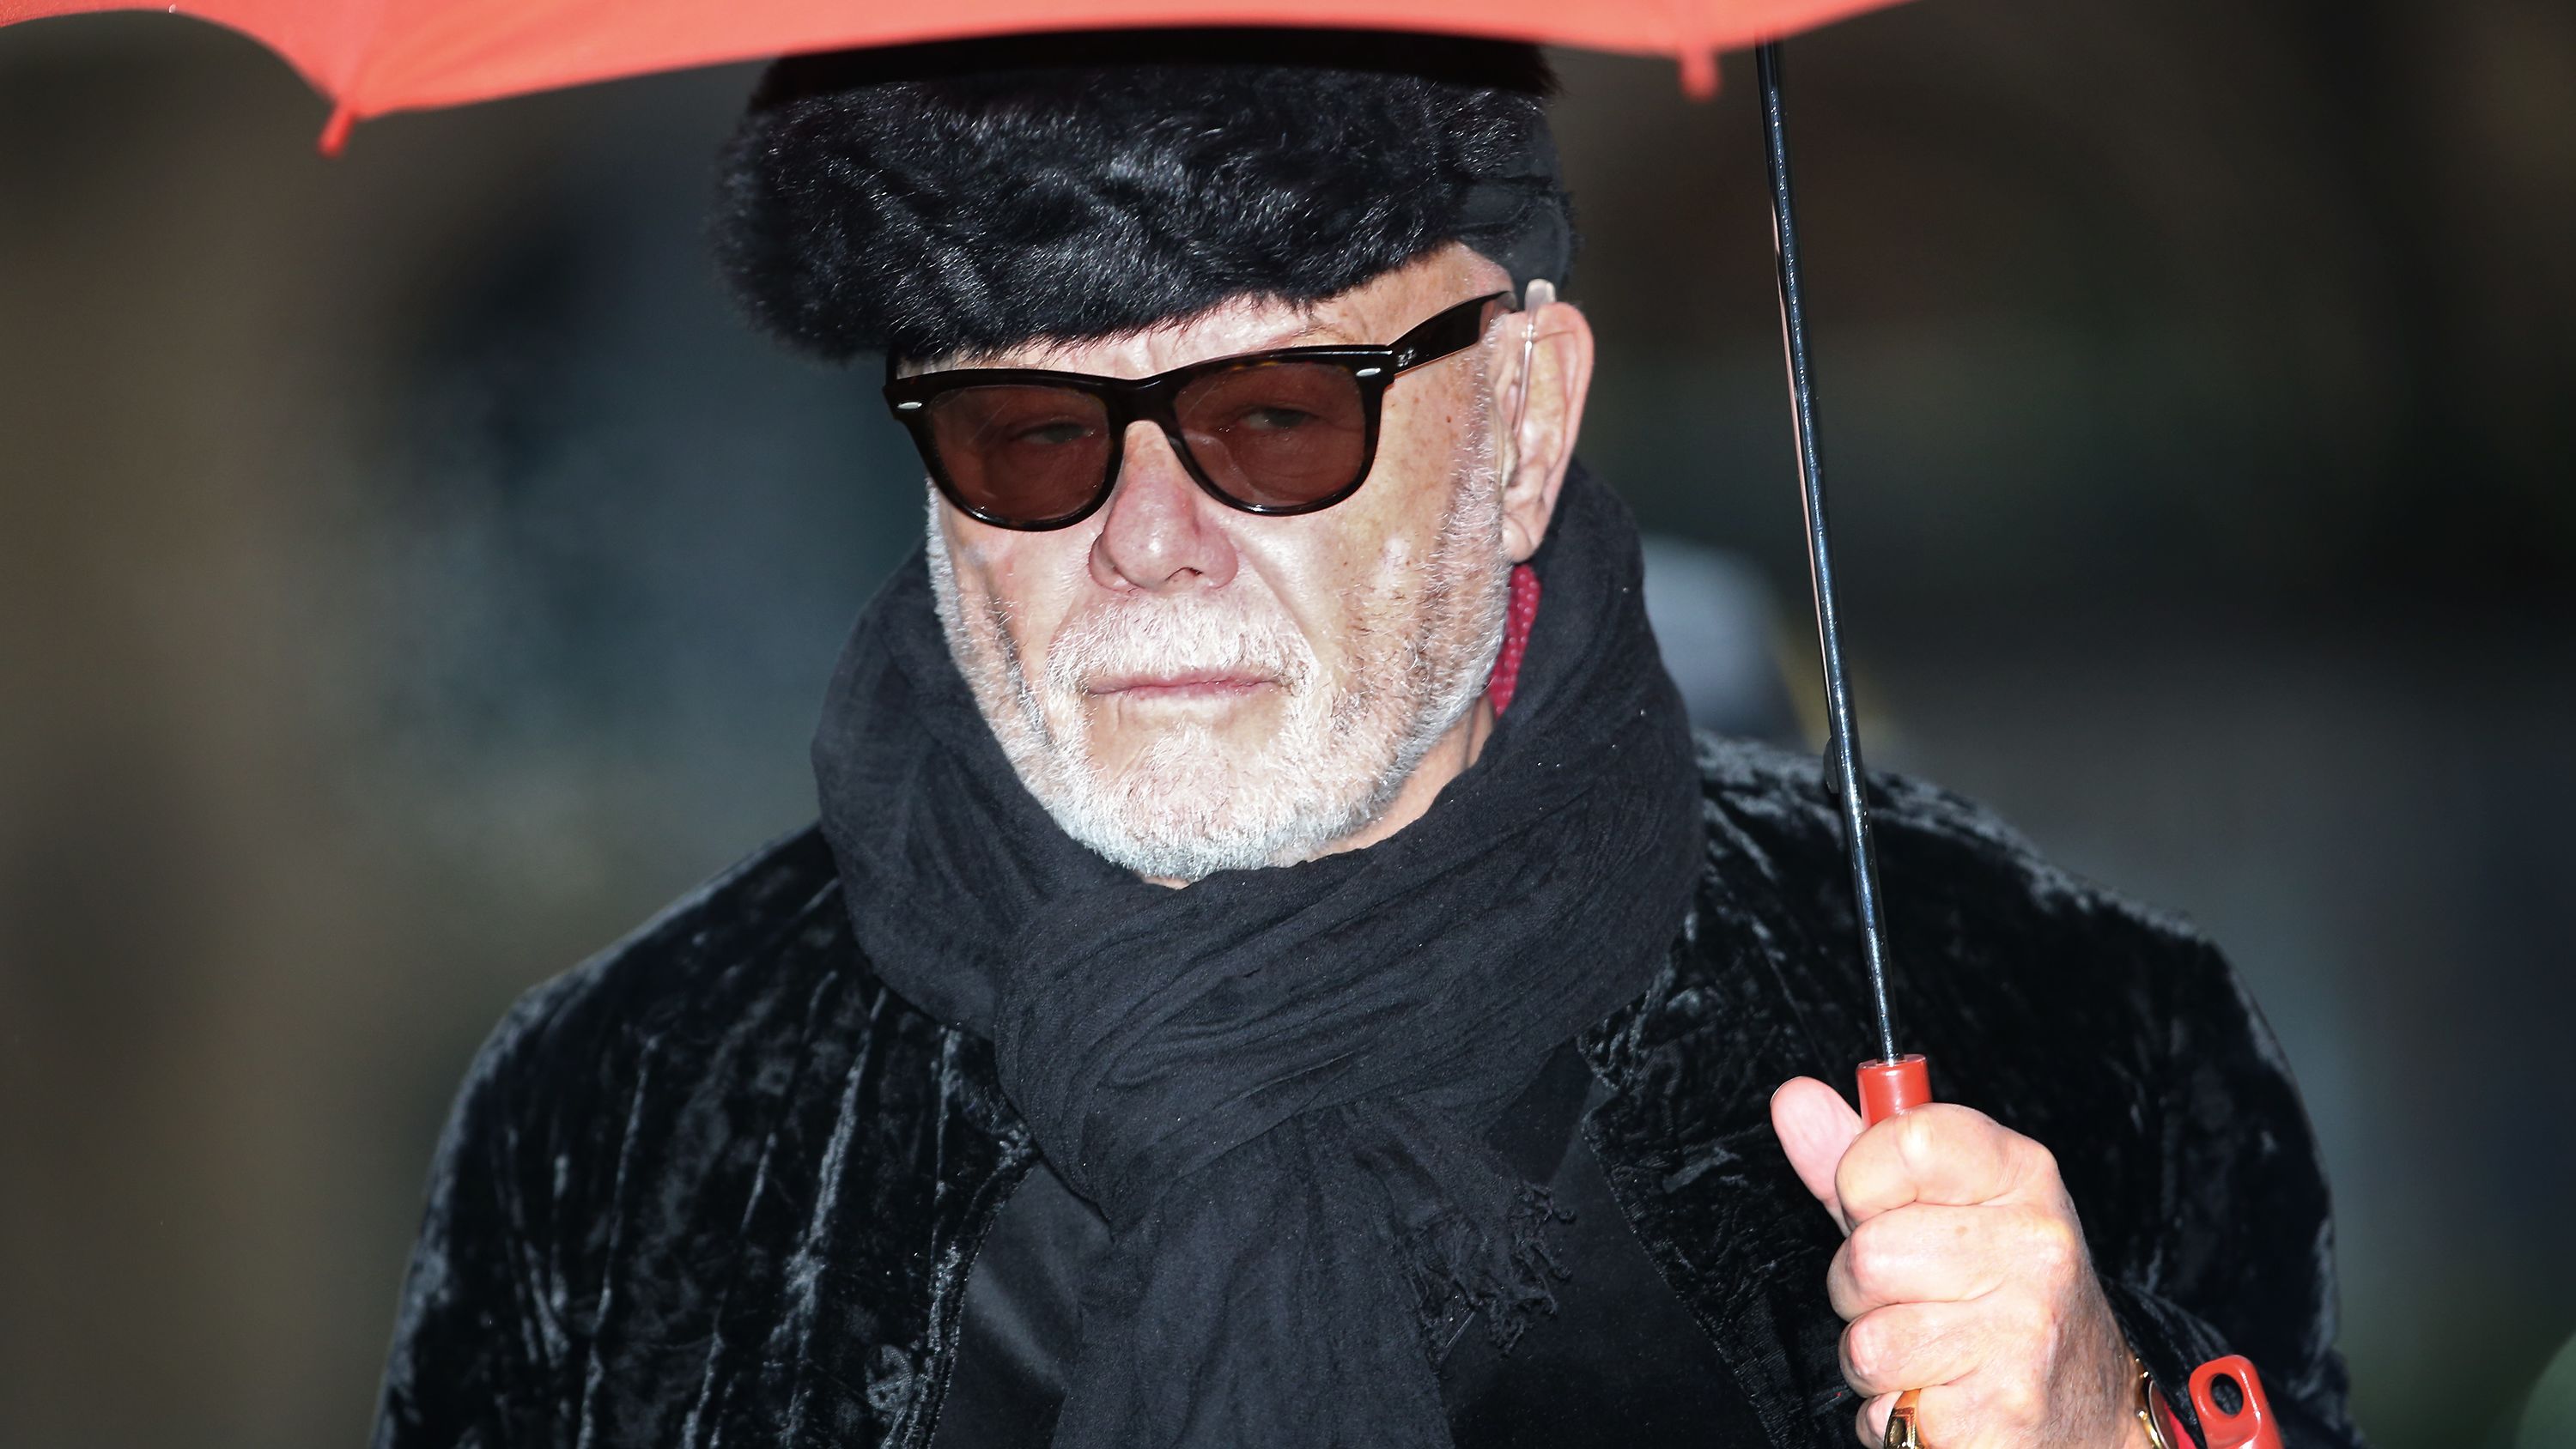 Regeringsforordning krone Afbrydelse Gary Glitter: 'Joker' uses a song by a convicted pedophile. He's probably  making money off it | CNN